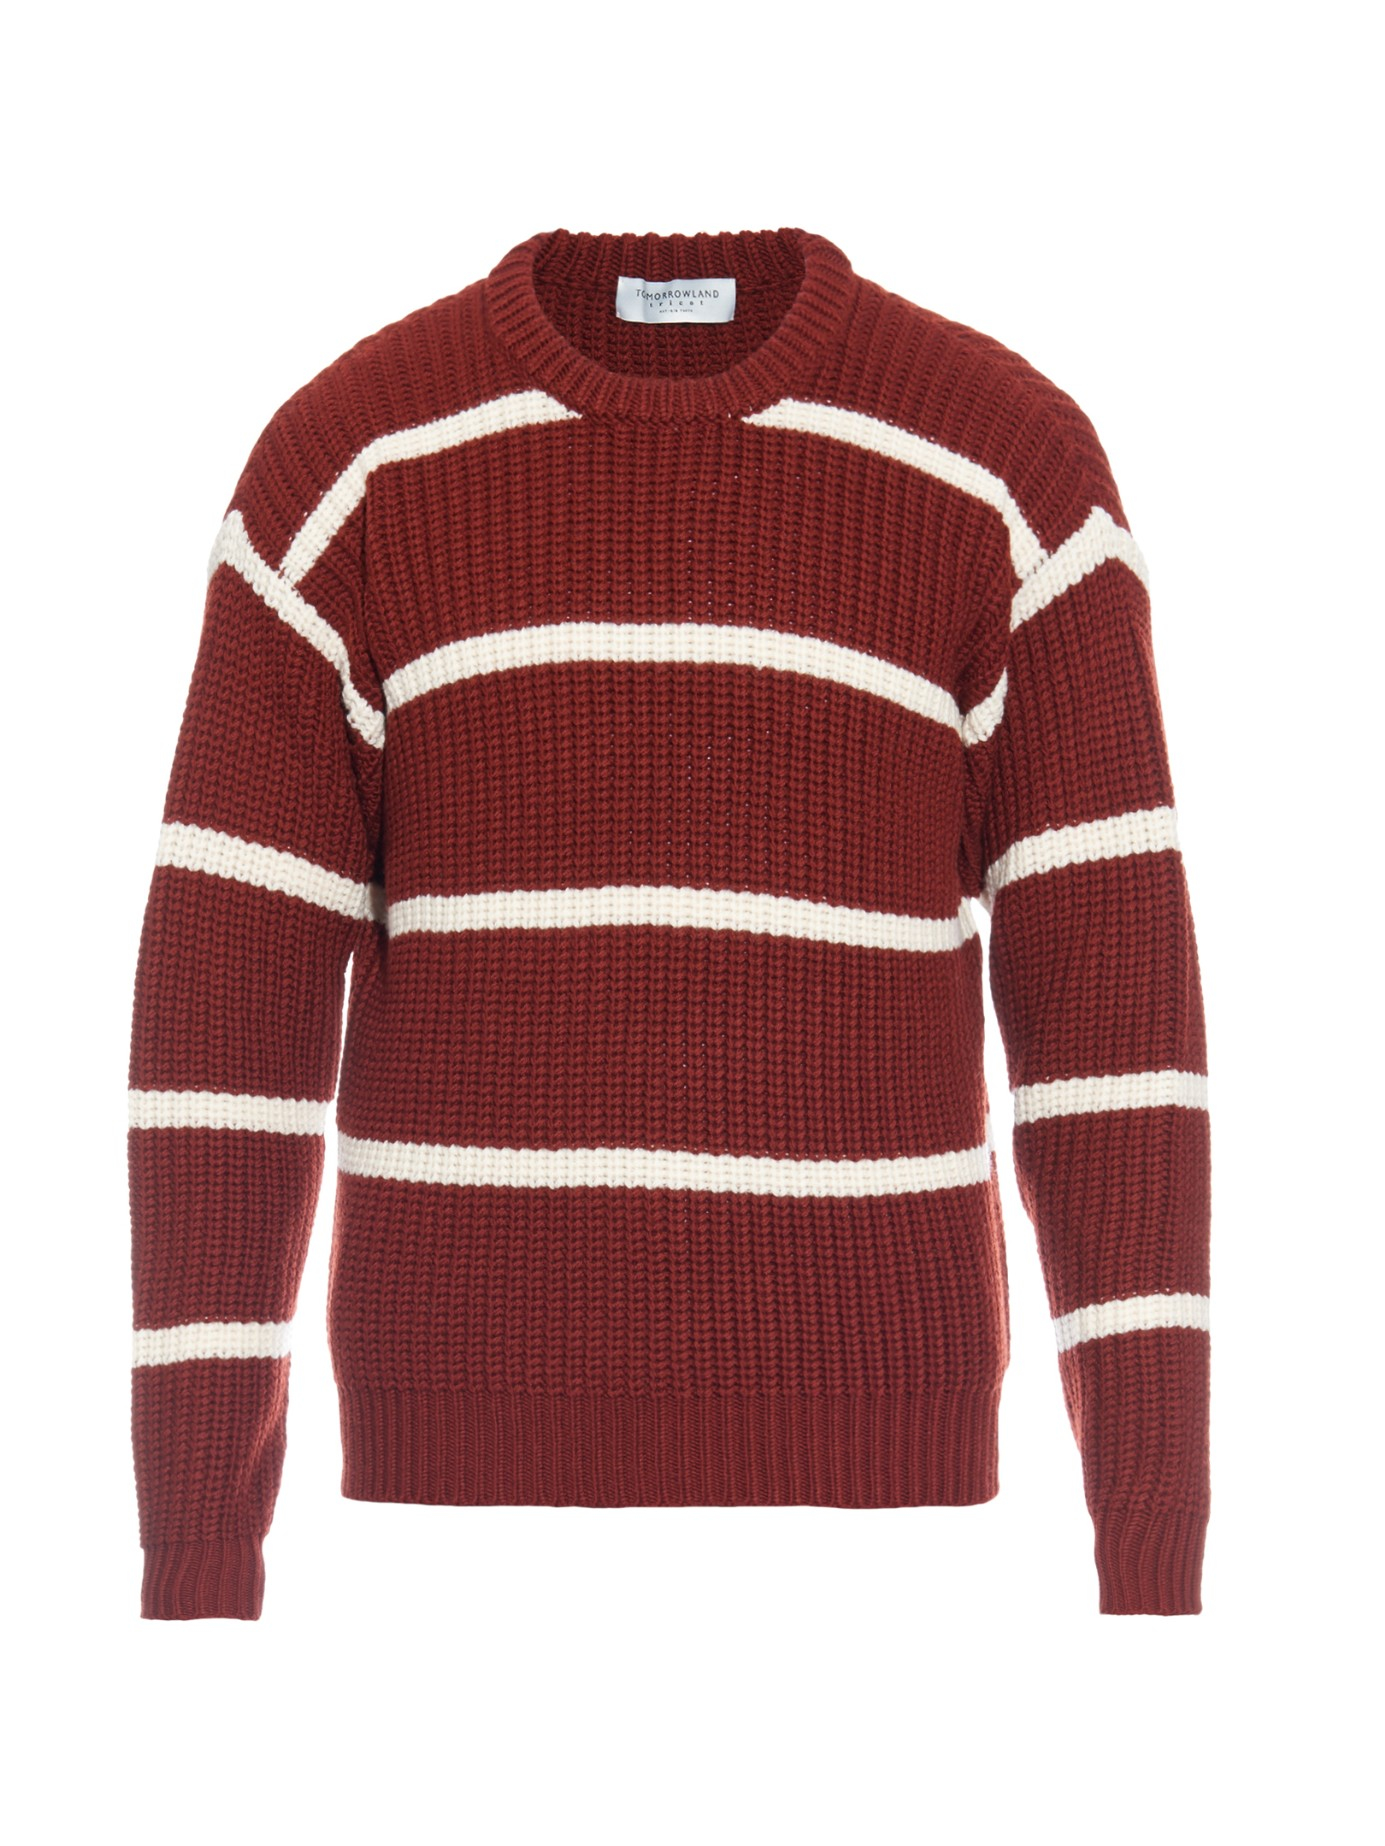 Lyst - Tomorrowland Striped Wool Sweater in Brown for Men